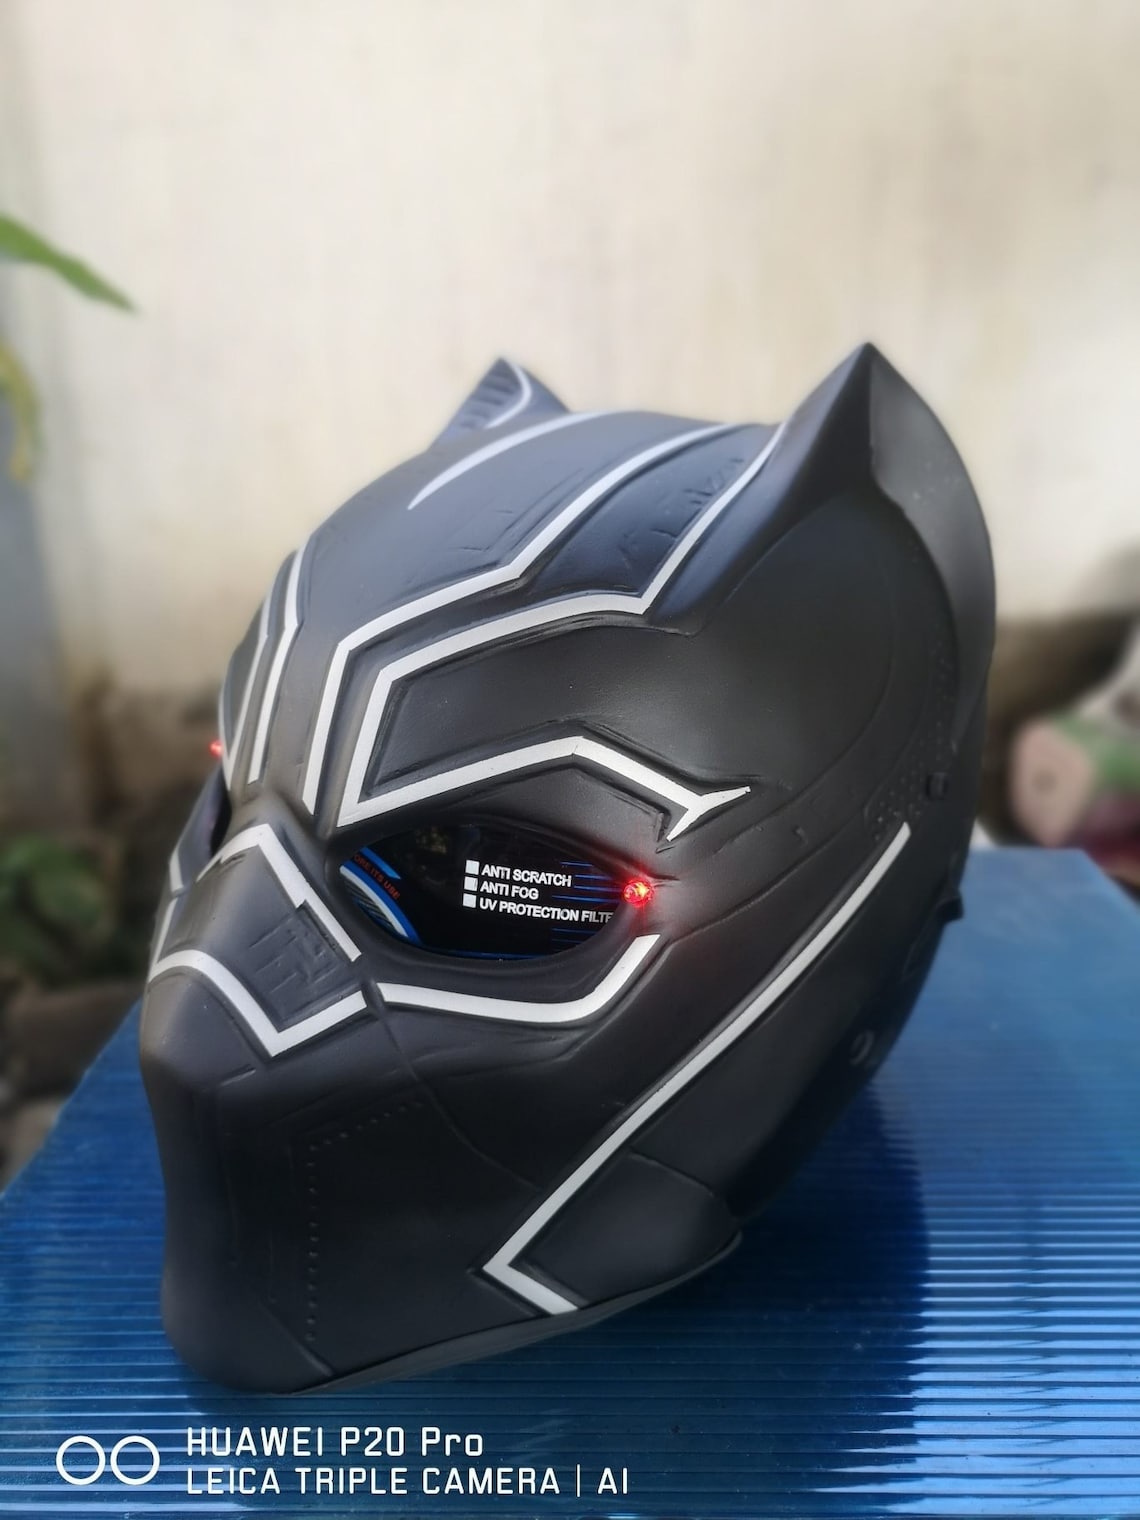 Great Amazing Black panther motorcycle Helmet super sold out | Etsy